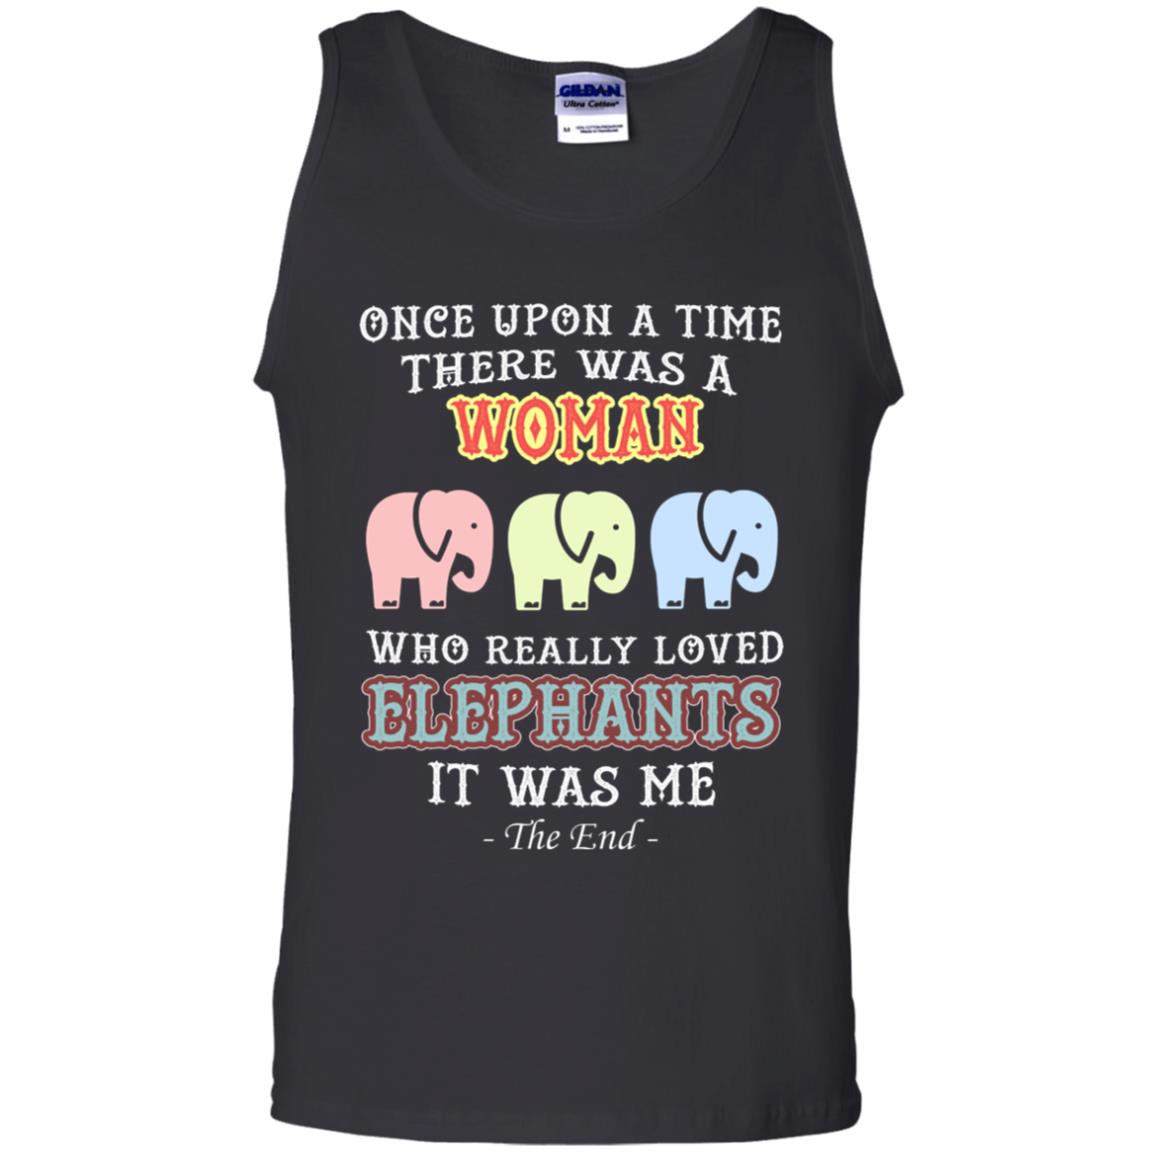 There Was A Woman Who Really Loved Elephants It Was Me ShirtG220 Gildan 100% Cotton Tank Top